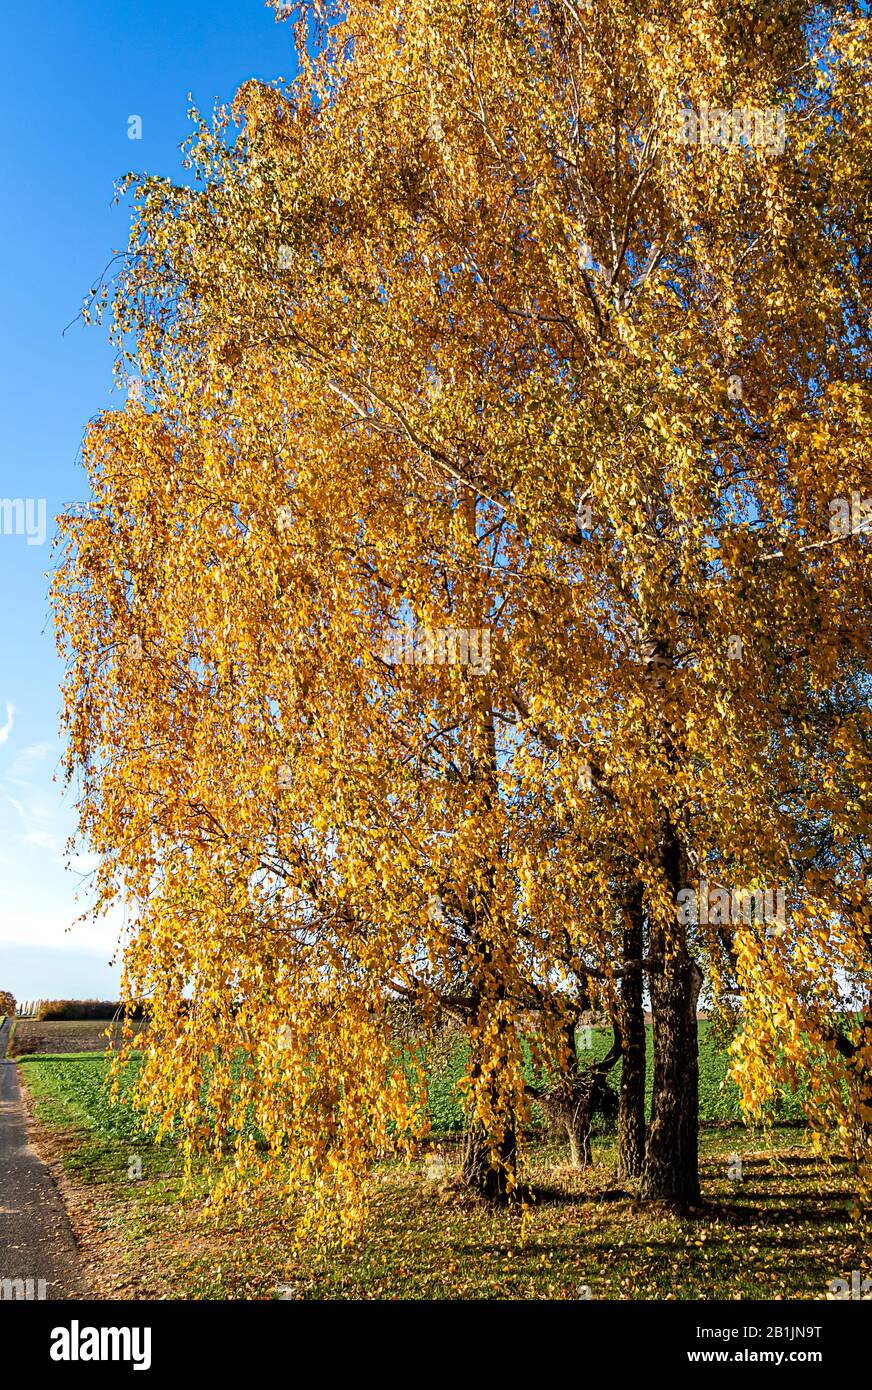 Rural landscape with linden trees in autumn colours on the roadside, close to thermal baths in Bad Saulgau, Germany Stock Photo